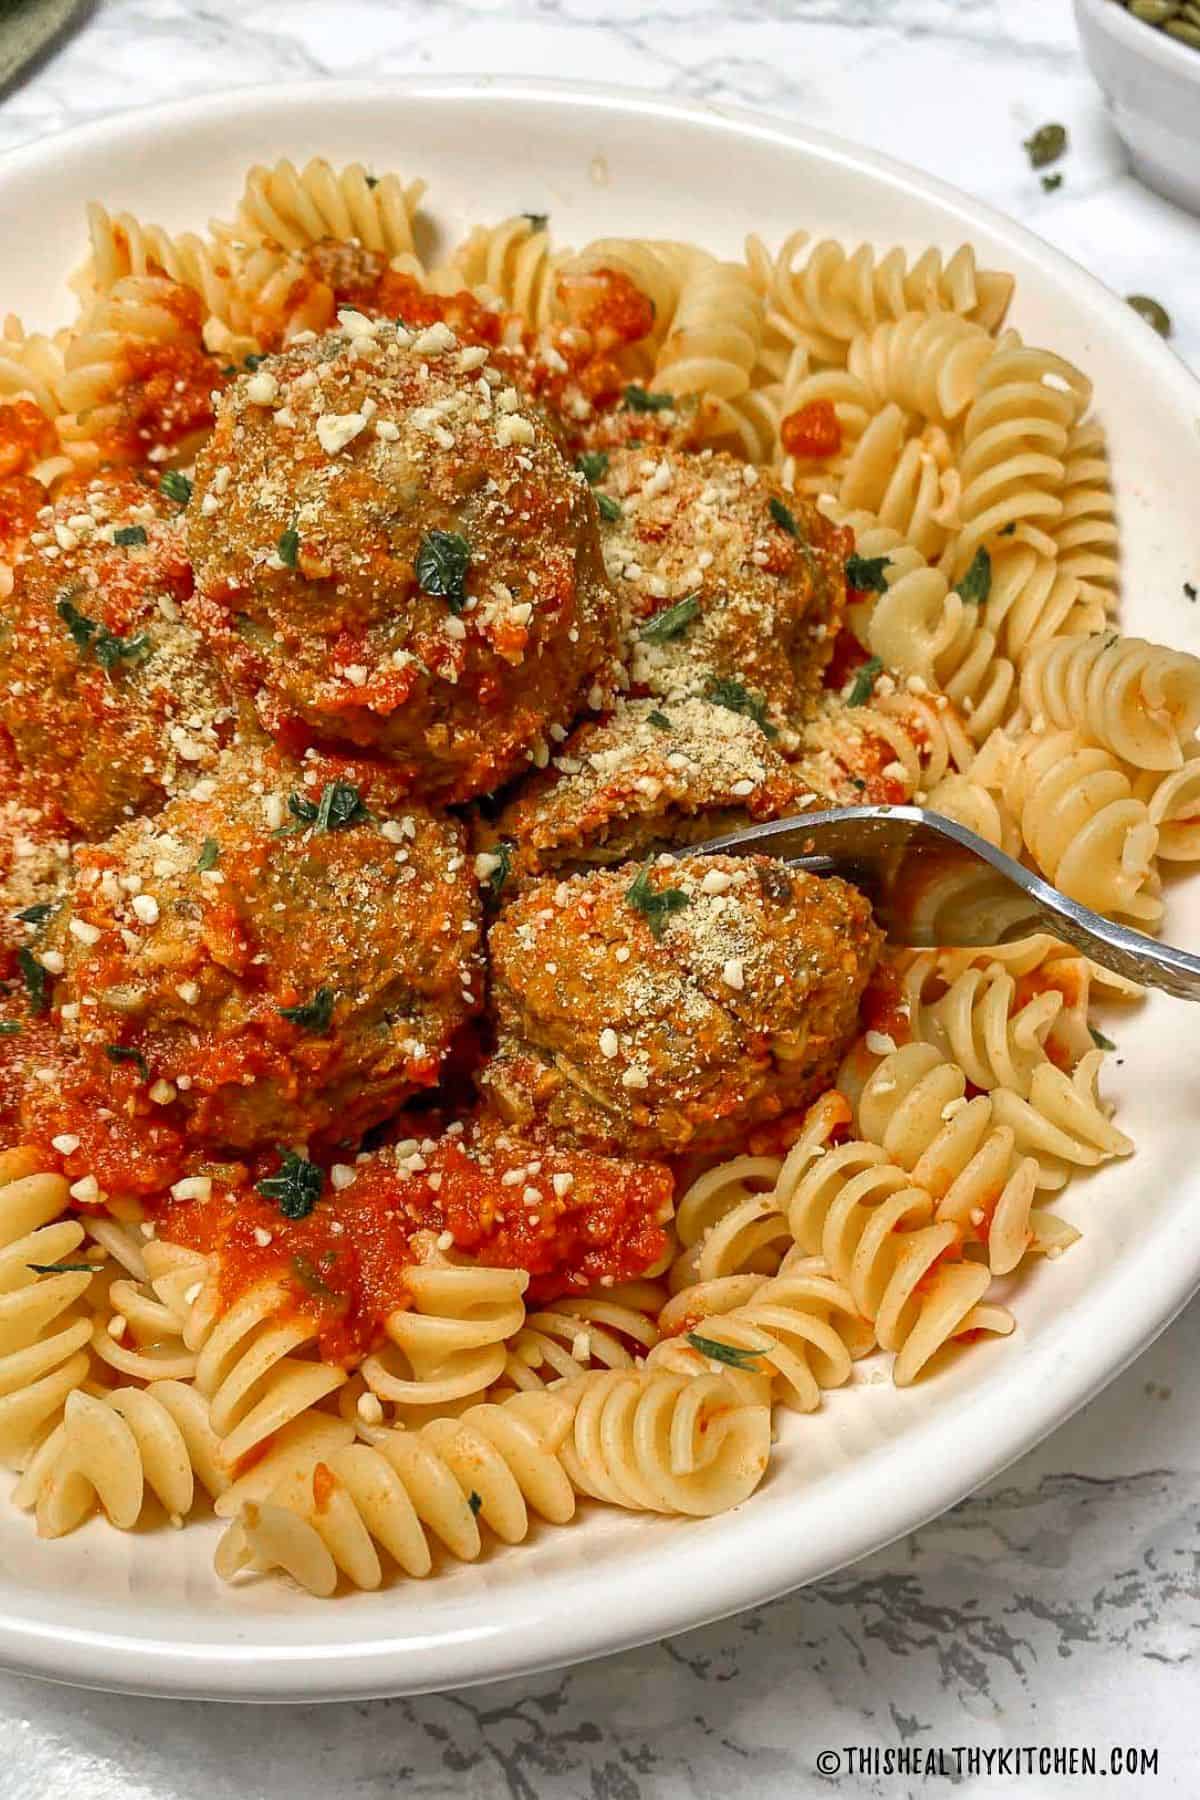 Fork cutting through a meatball resting on plate of pasta.